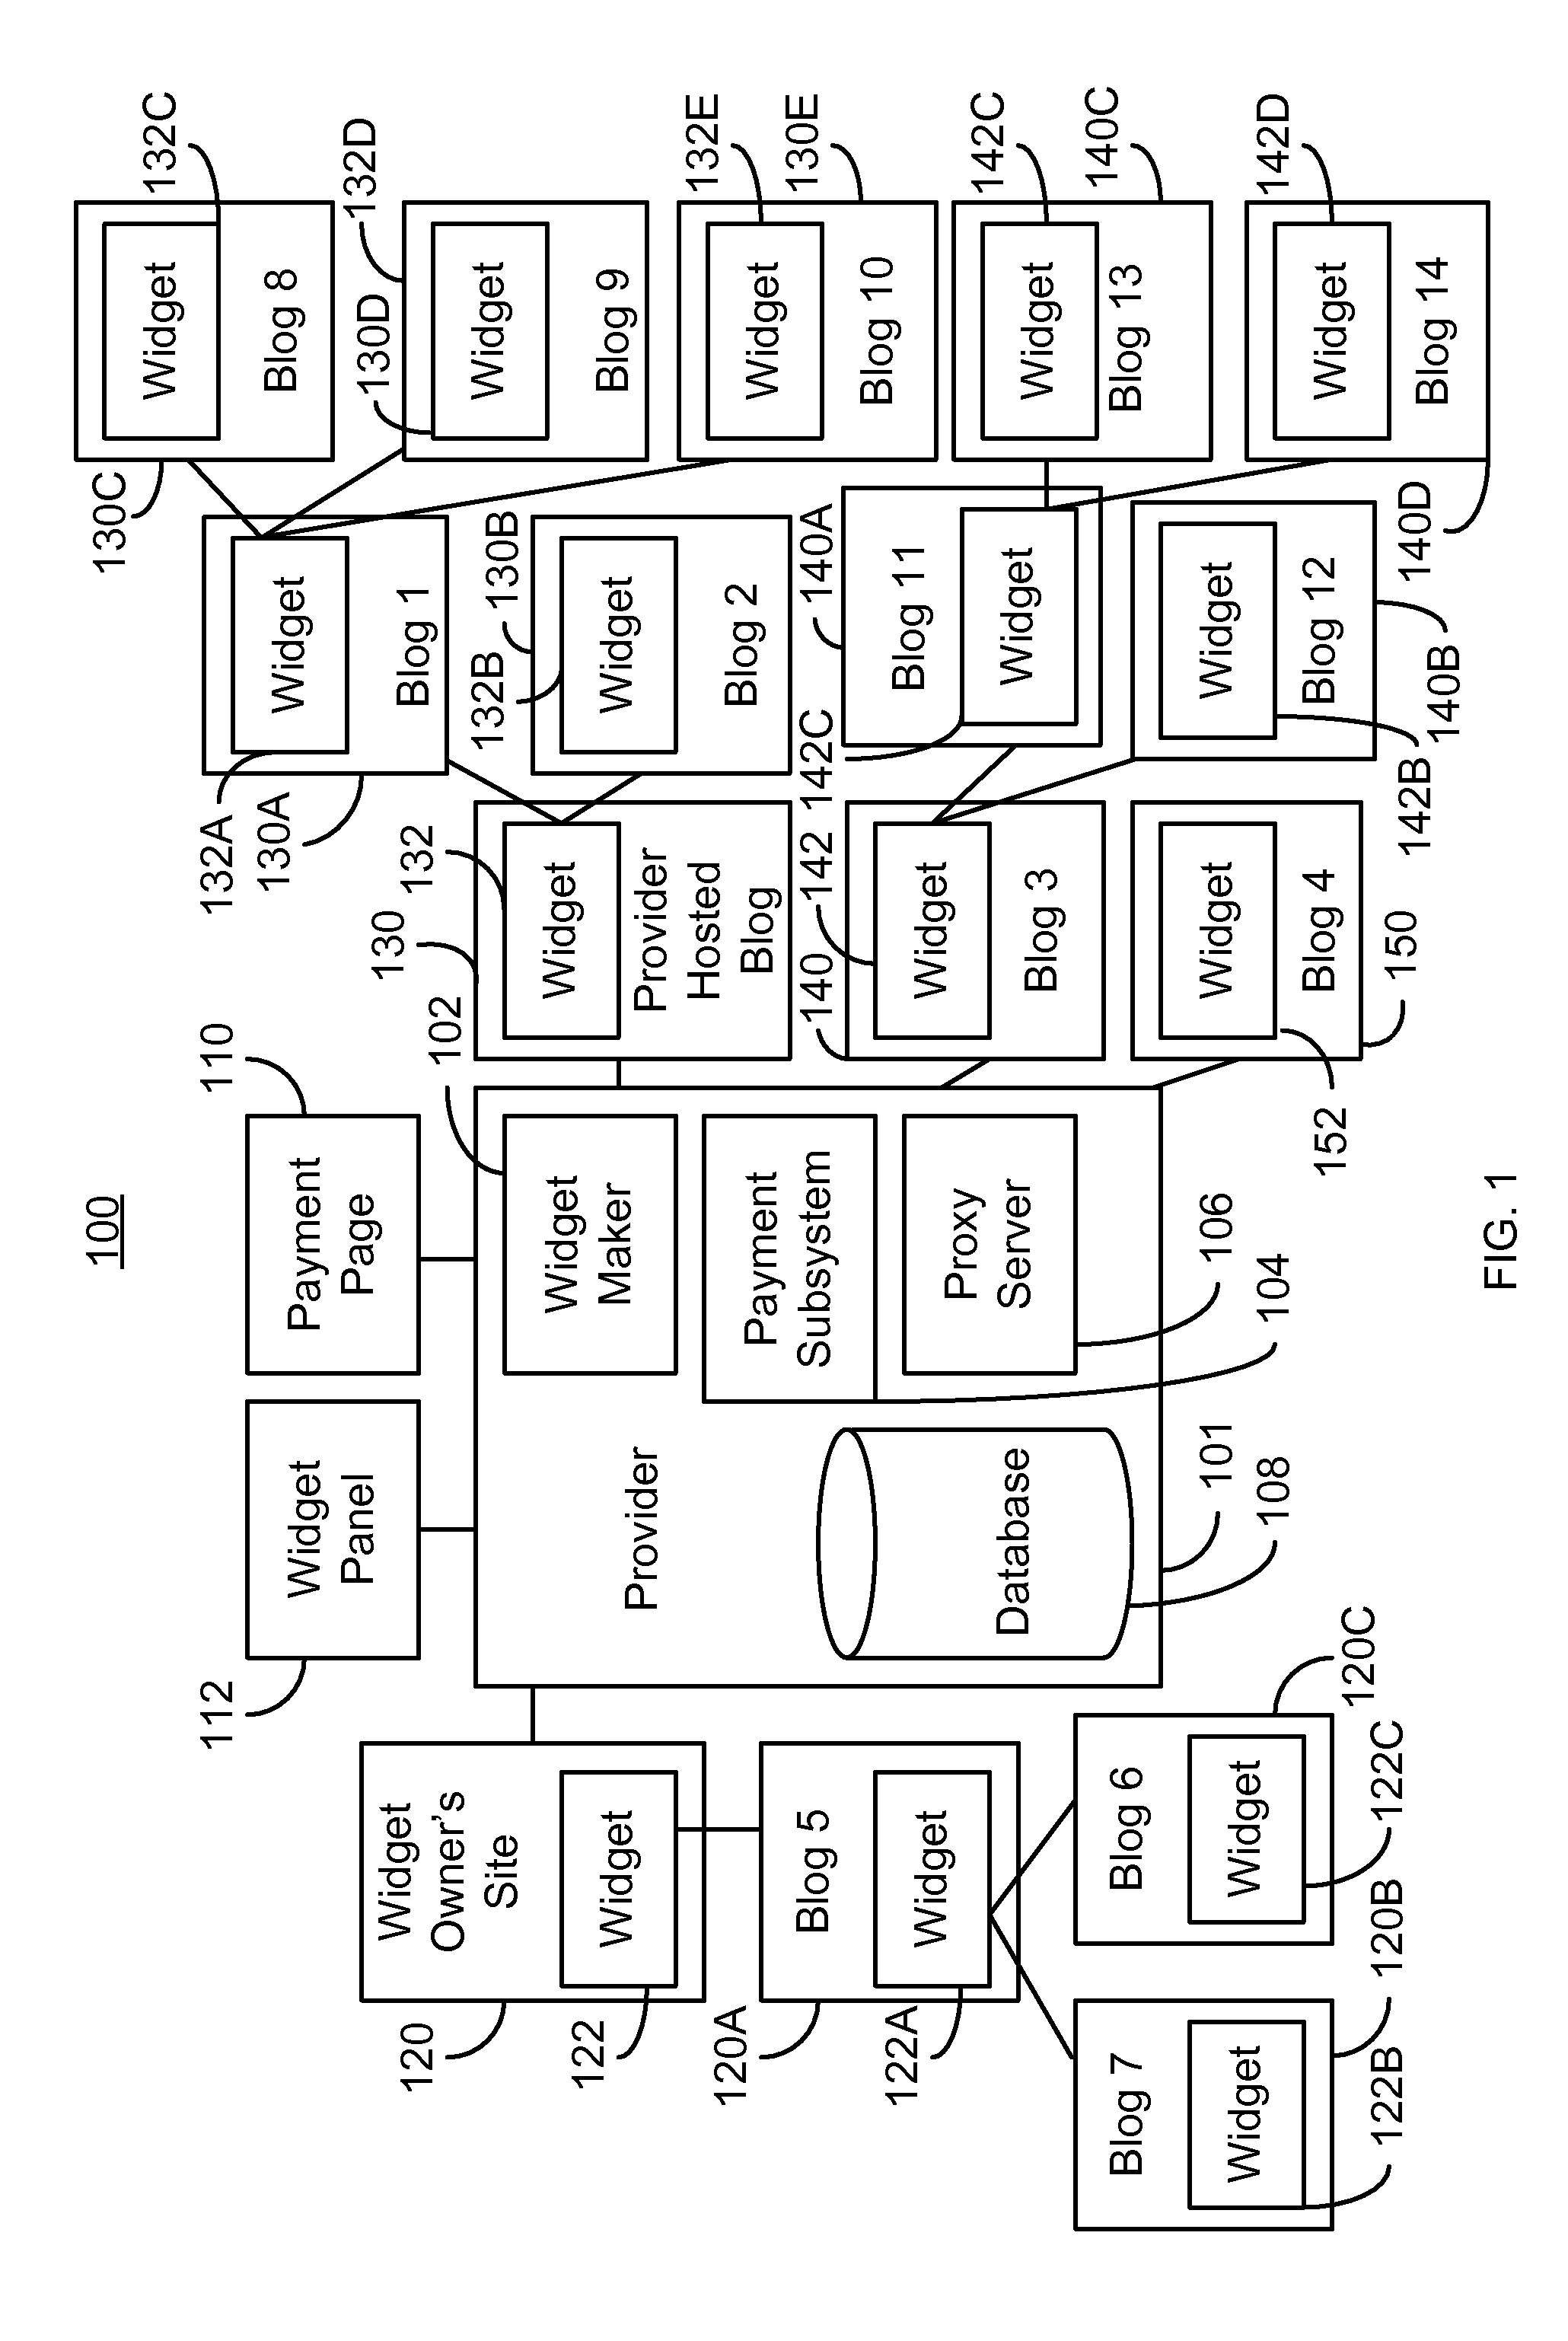 Method and system for facilitating social payment or commercial transactions